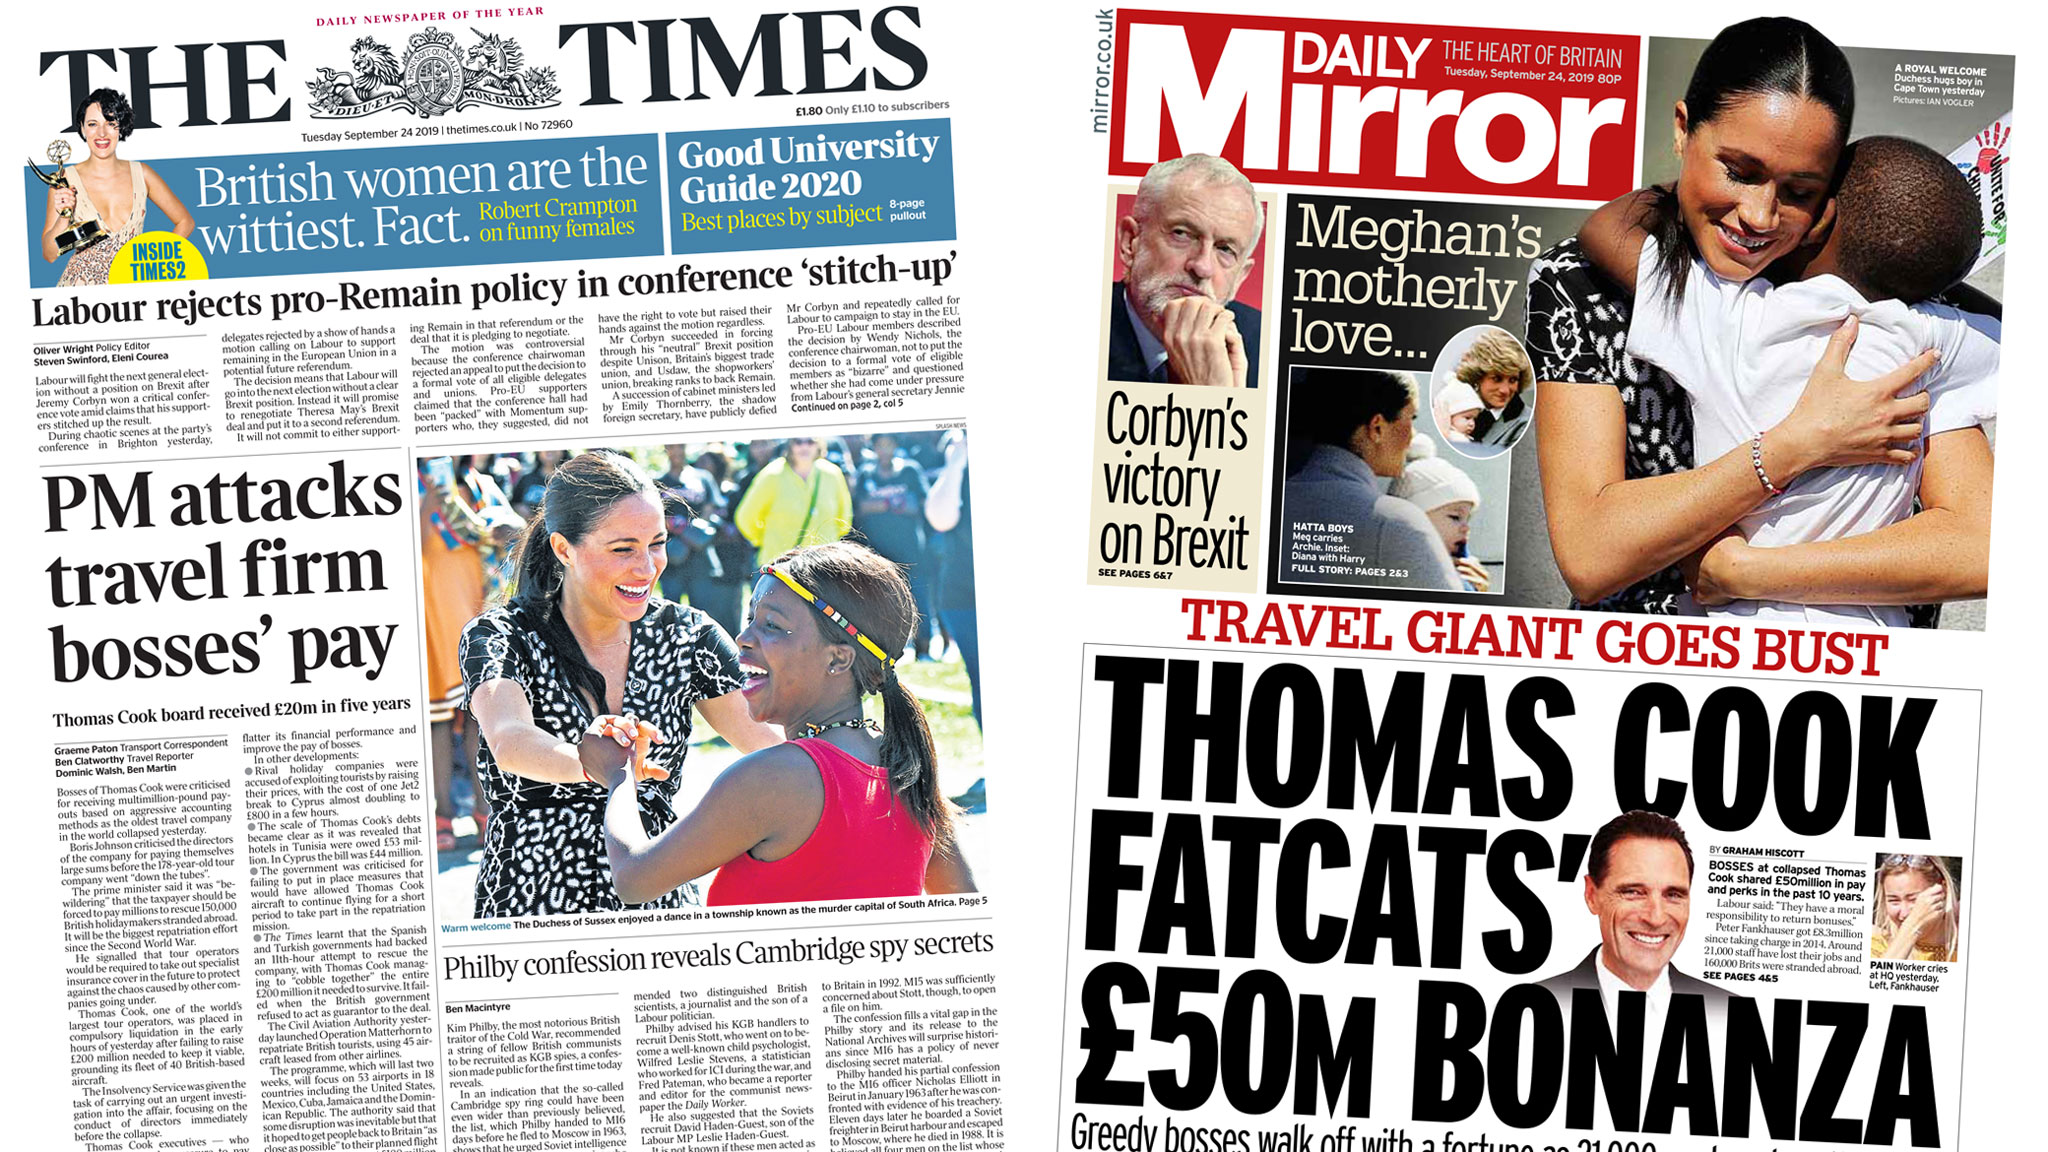 Newspaper headlines: Thomas Cook 'fat cats' and Meghan's - BBC